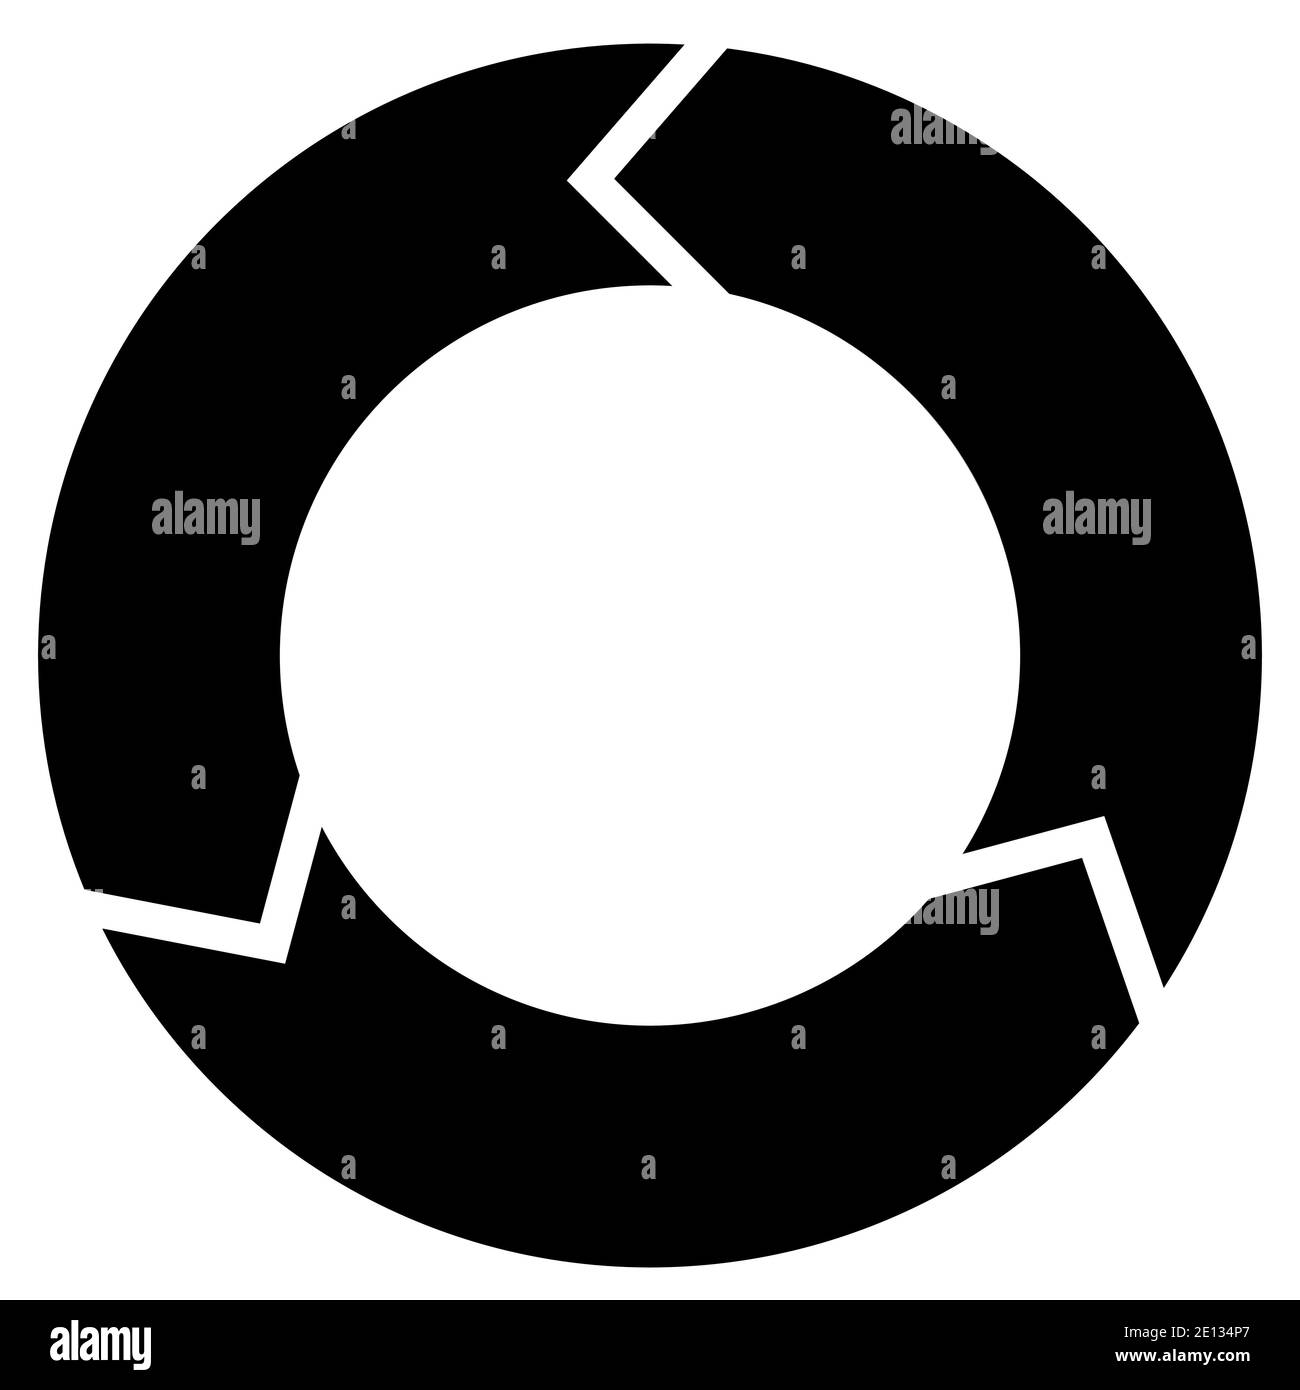 Circular diagram with rotation, three steps. Black on white background. Stock Vector